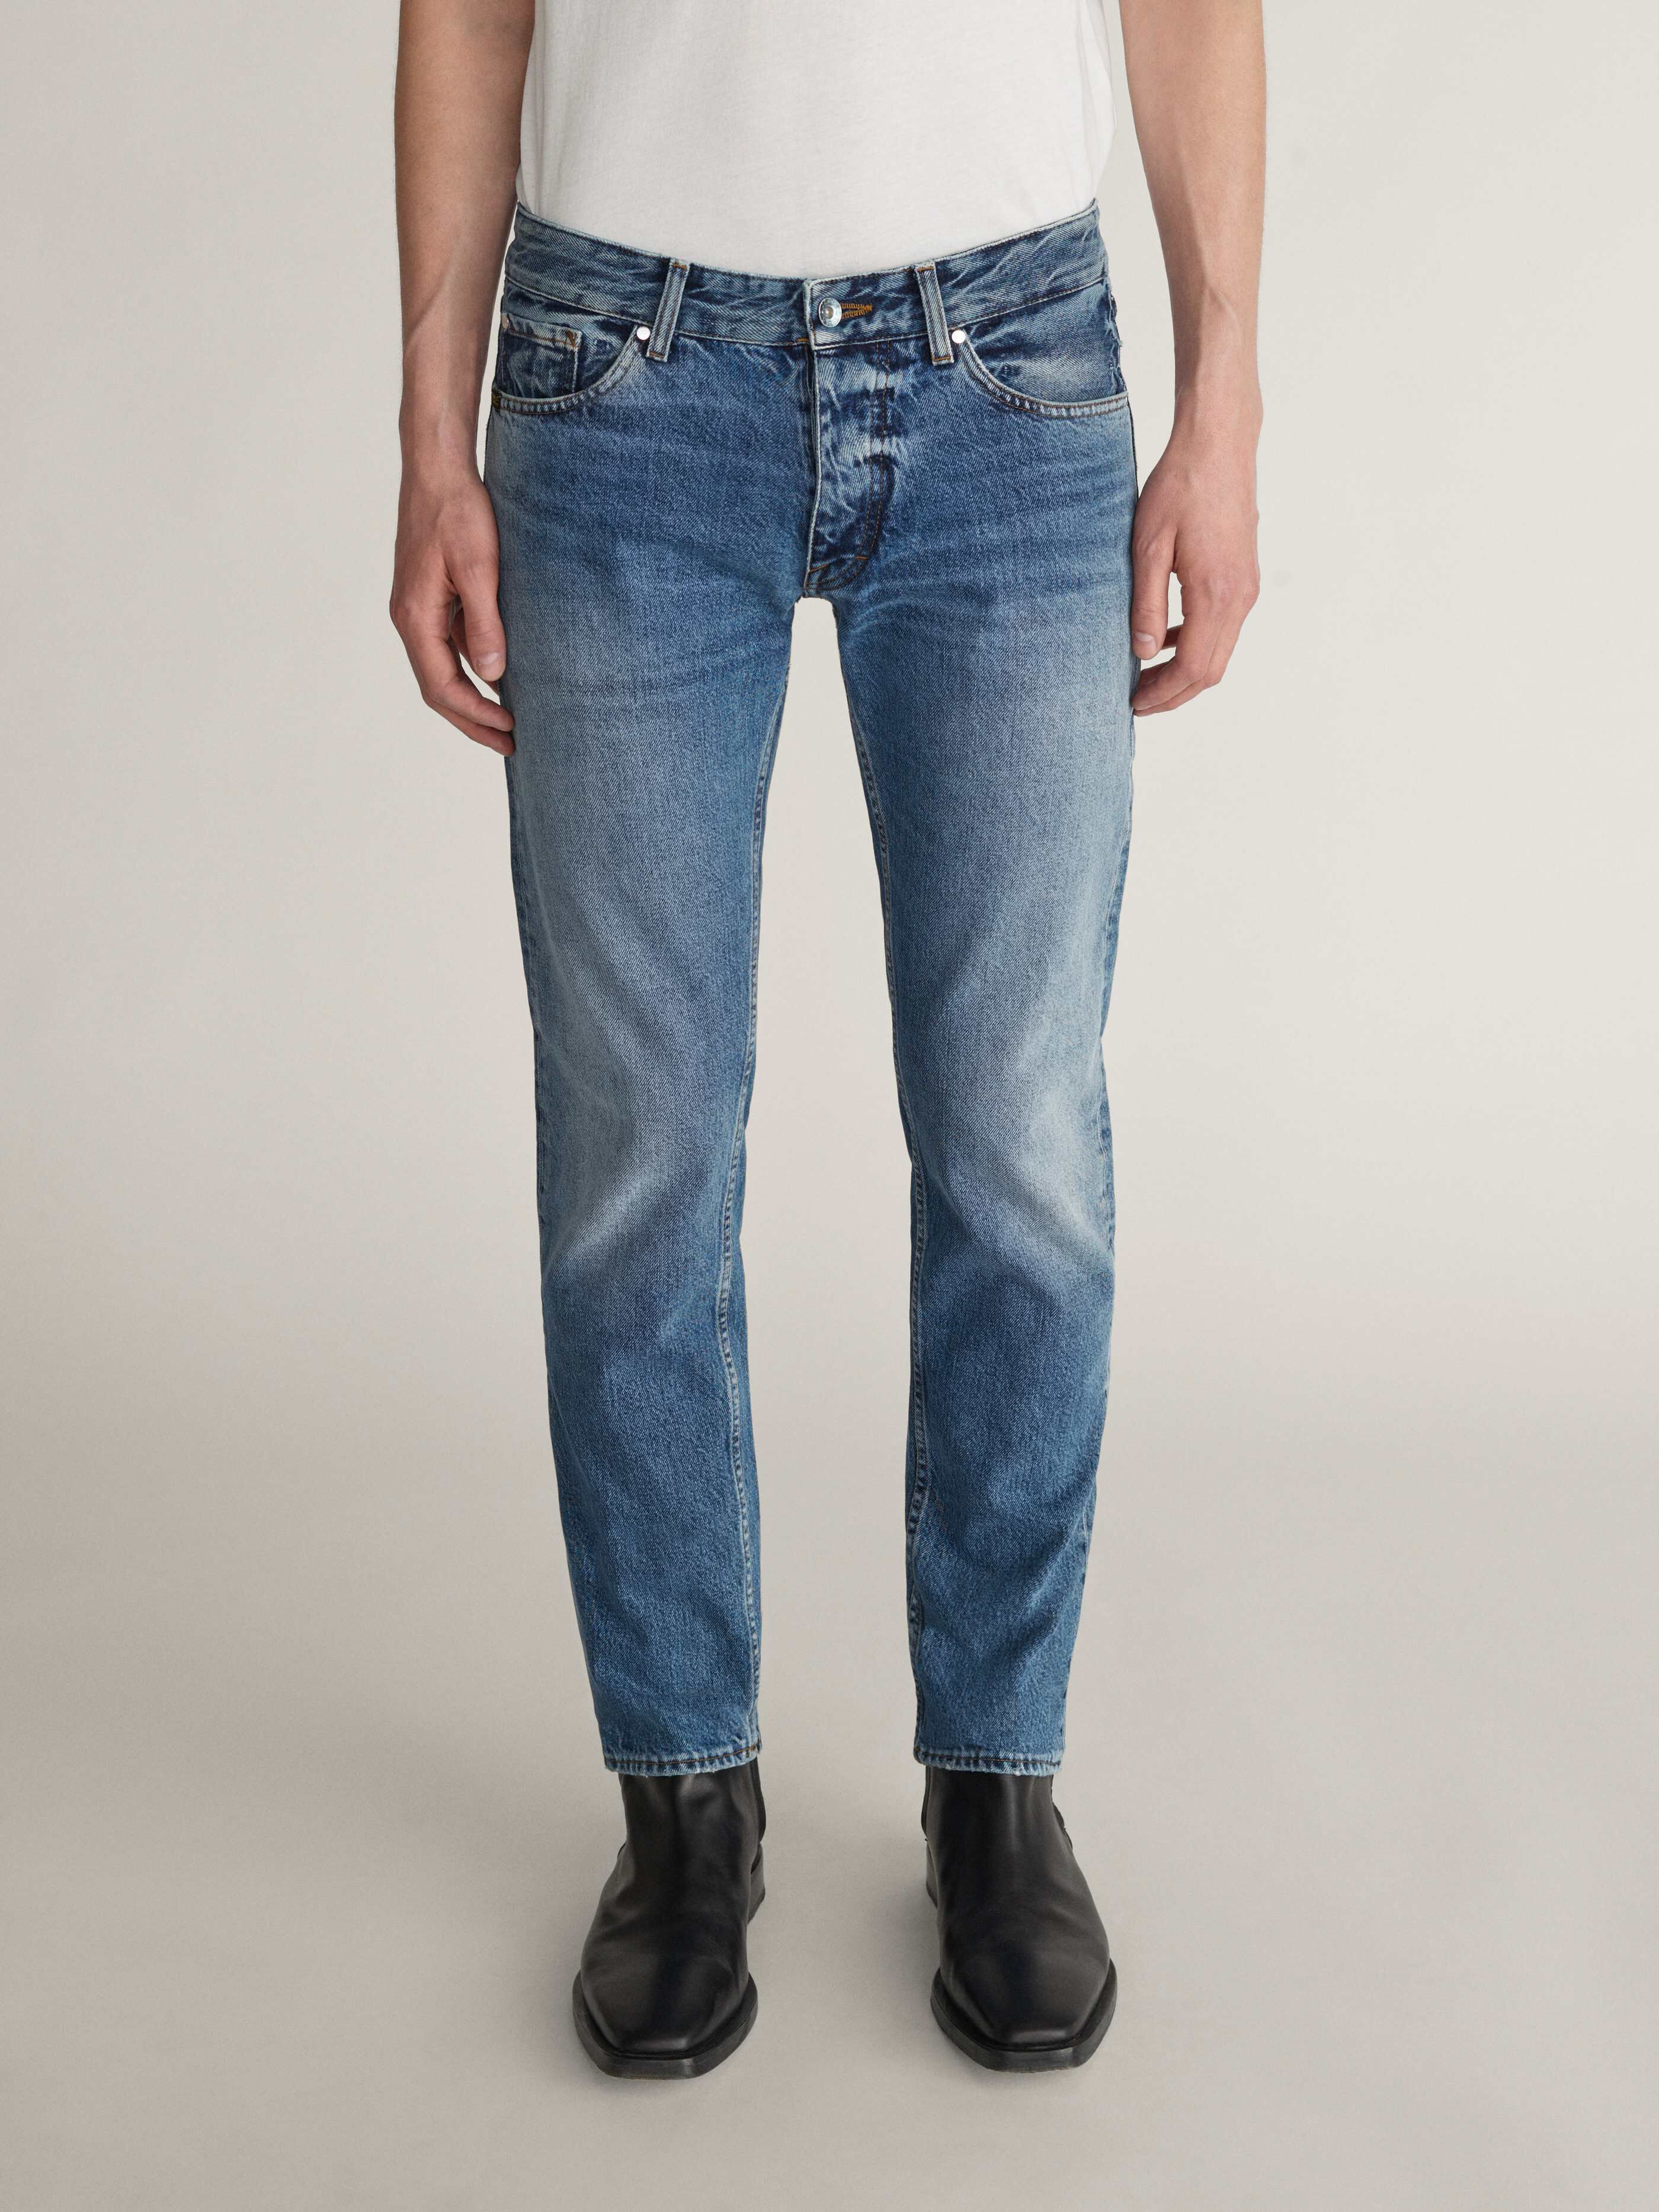 jeans pants for mens online india